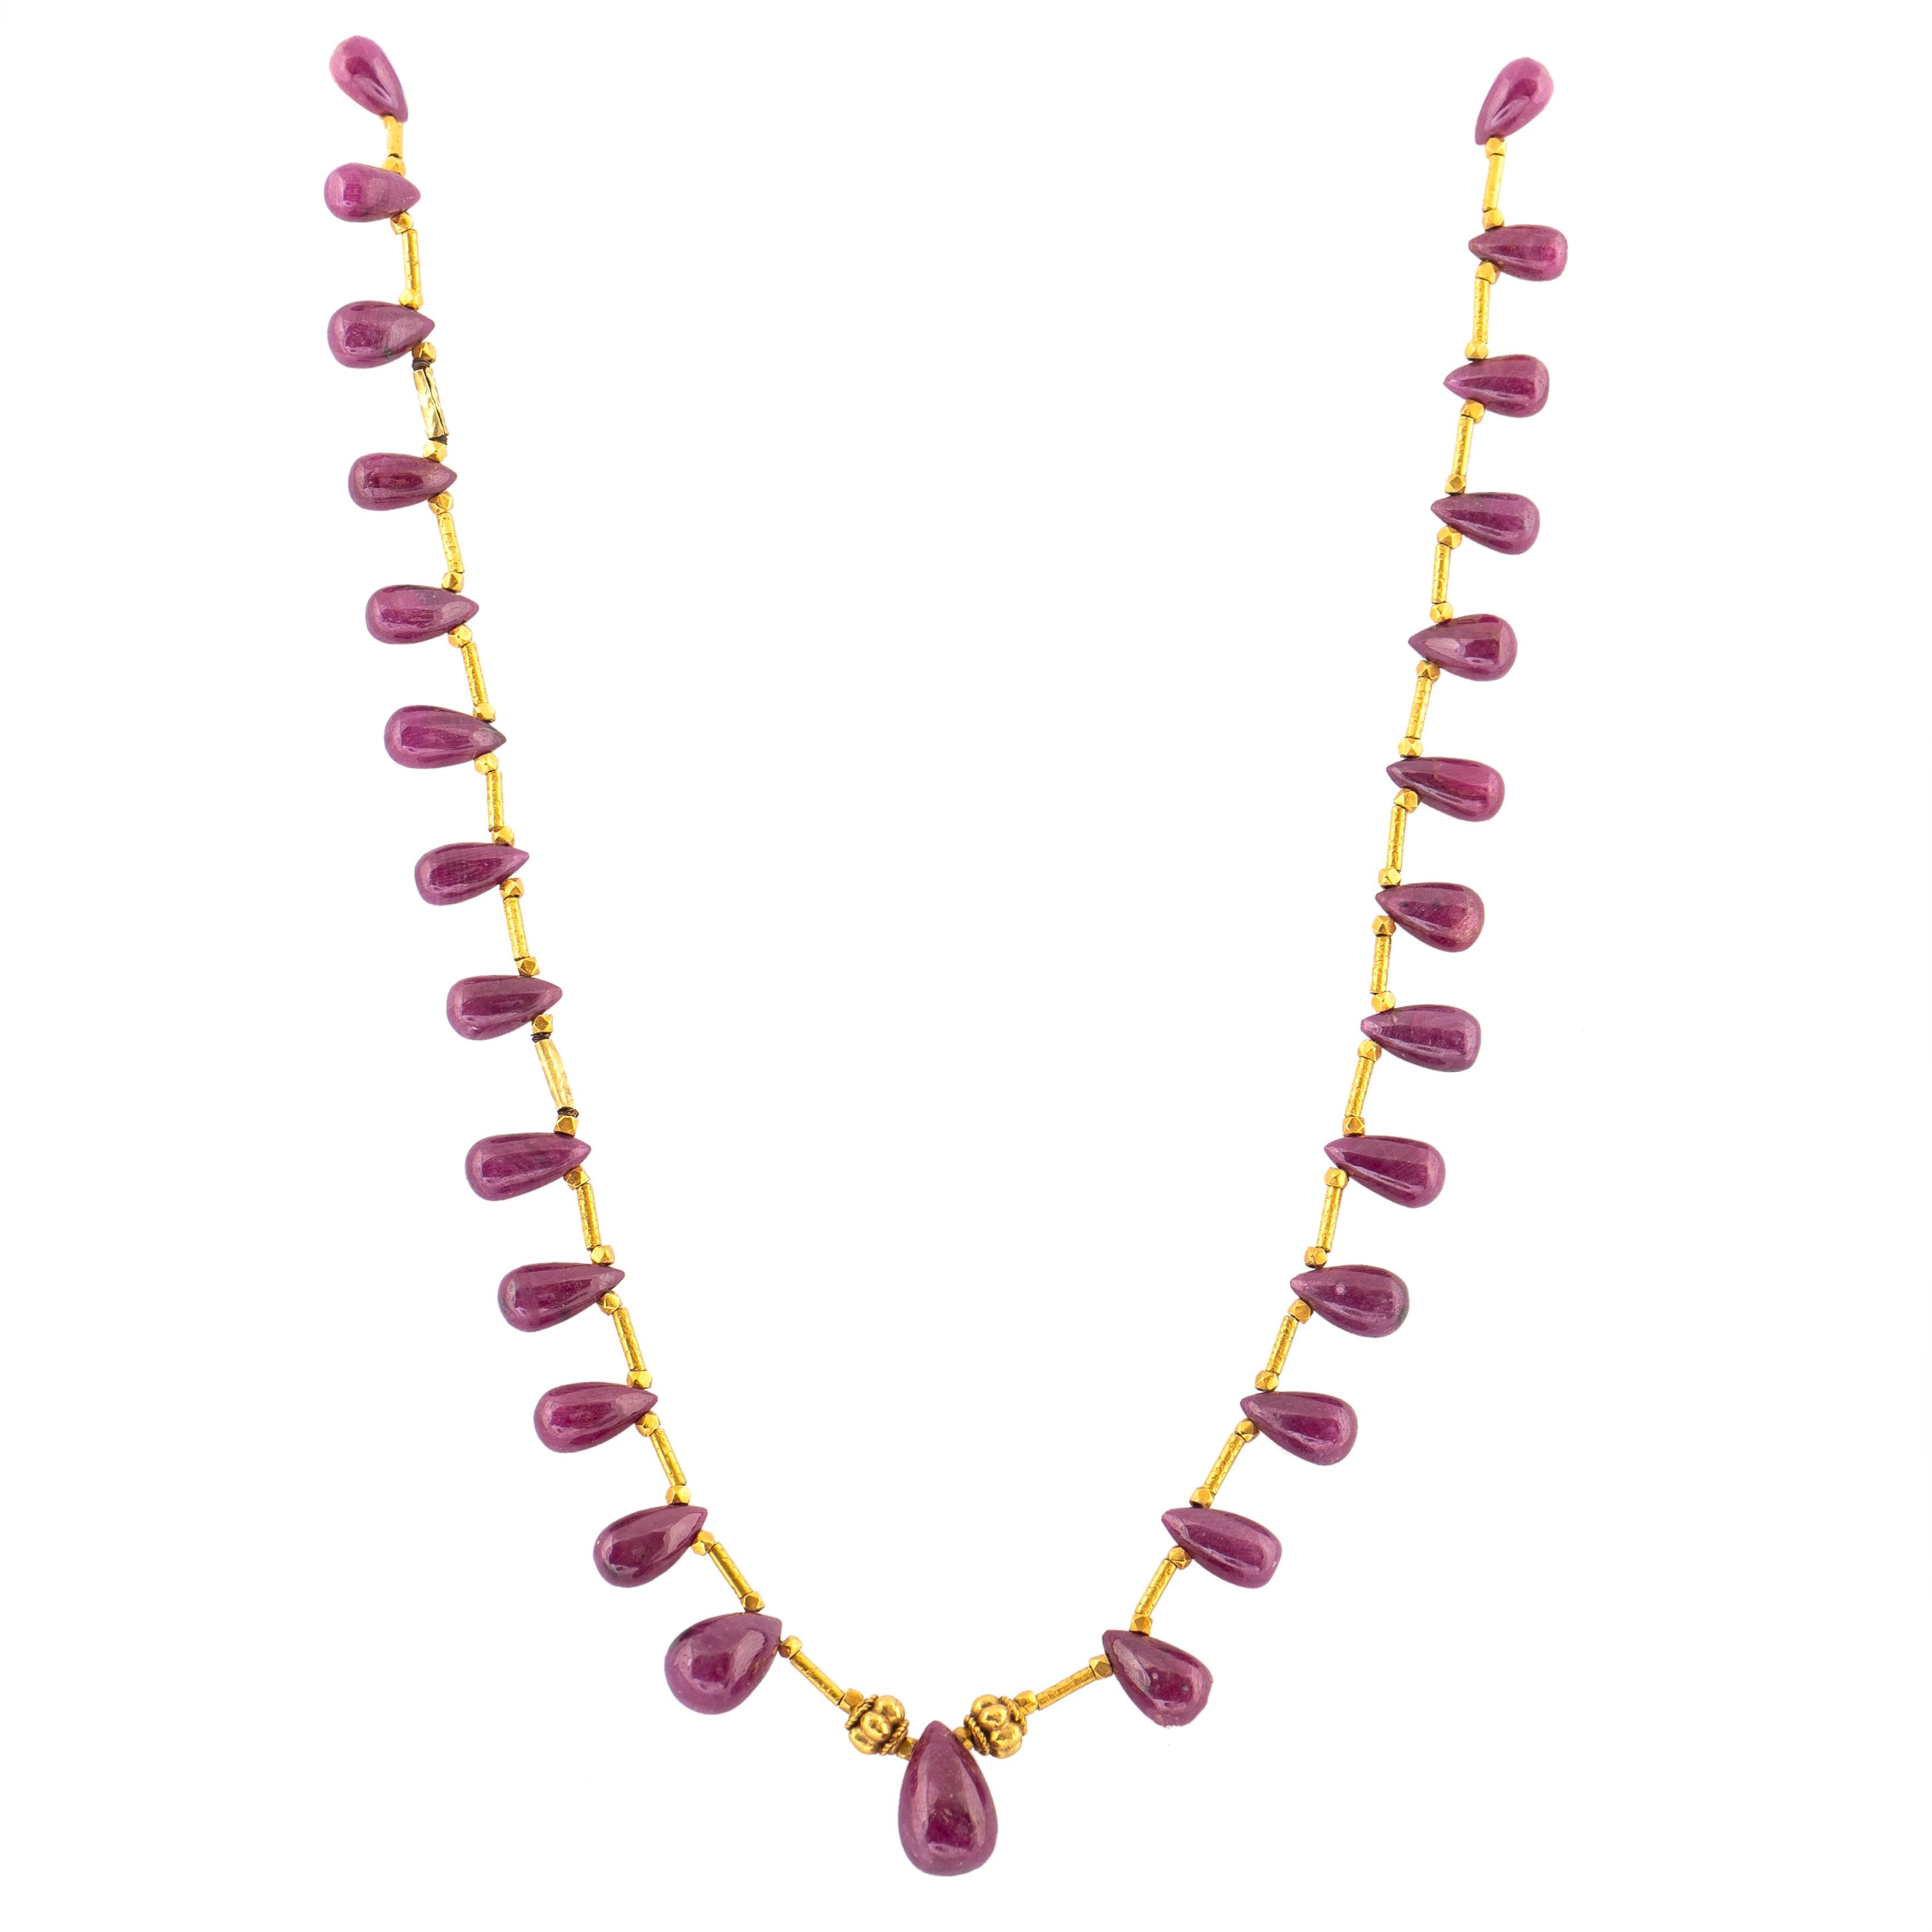 Hand made in the Etruscan style, designed as twenty eight ruby drops of rich deep raspberry colour, with a larger ruby drop in the center, enhanced by high karat gold link beads and tubular links, attached to a high carat gold custom made clasp.

15